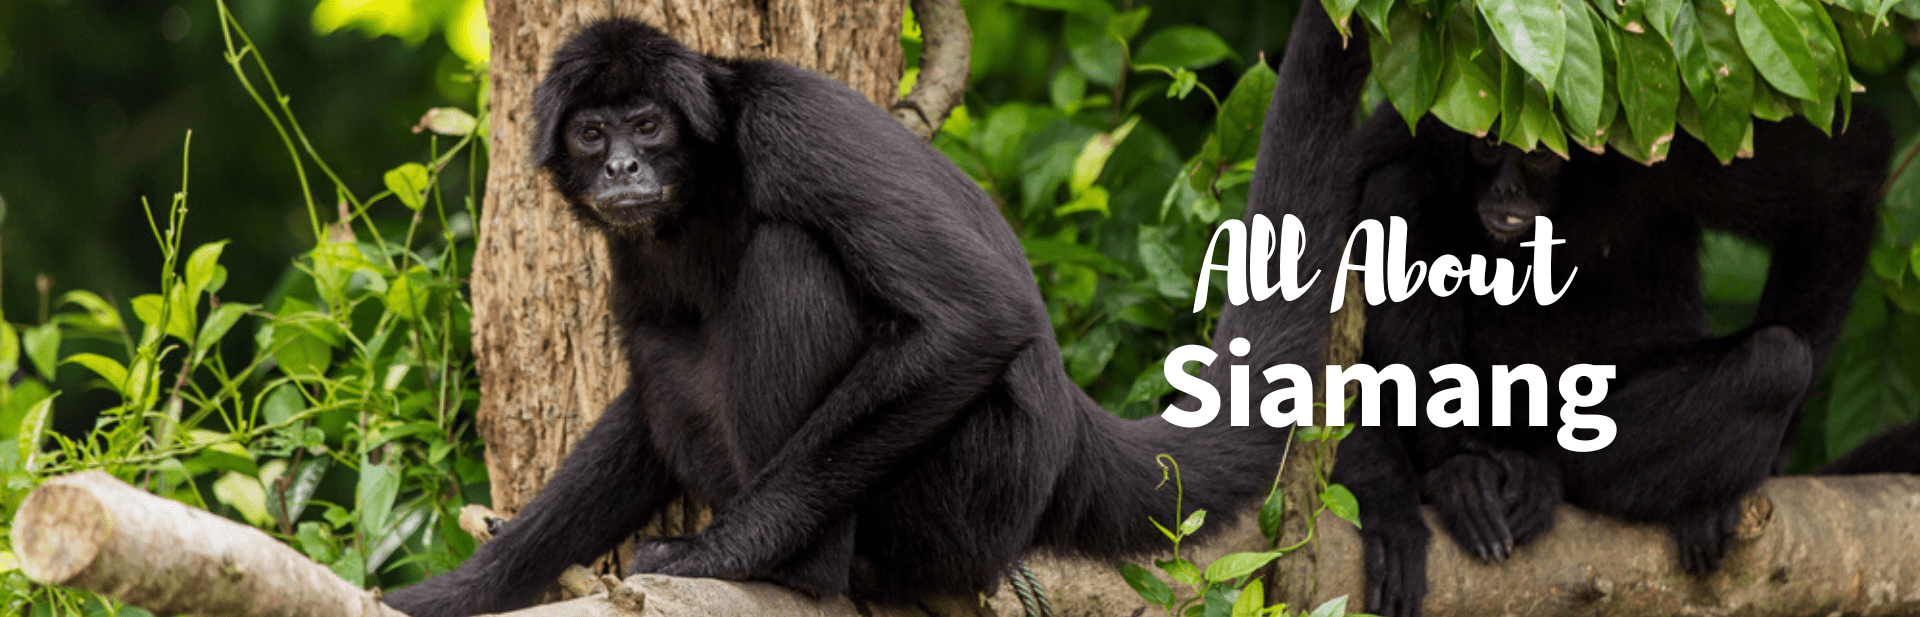 The Siamang: All About The Loudest & Largest Gibbon